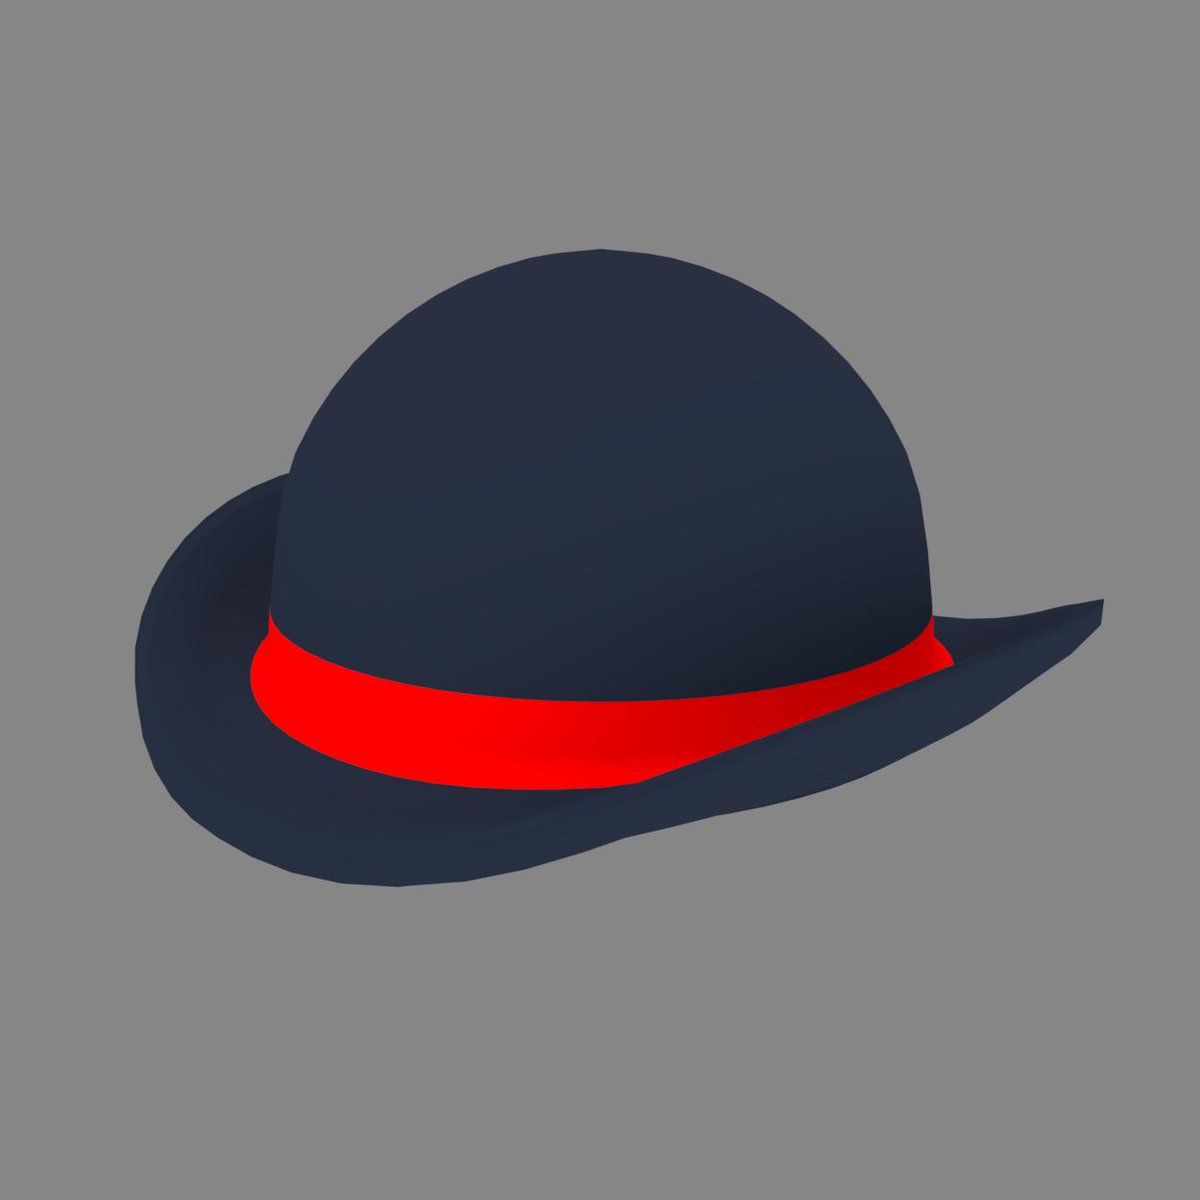 Mas On Twitter My Idea For A Hat Series In Roblox The Colored